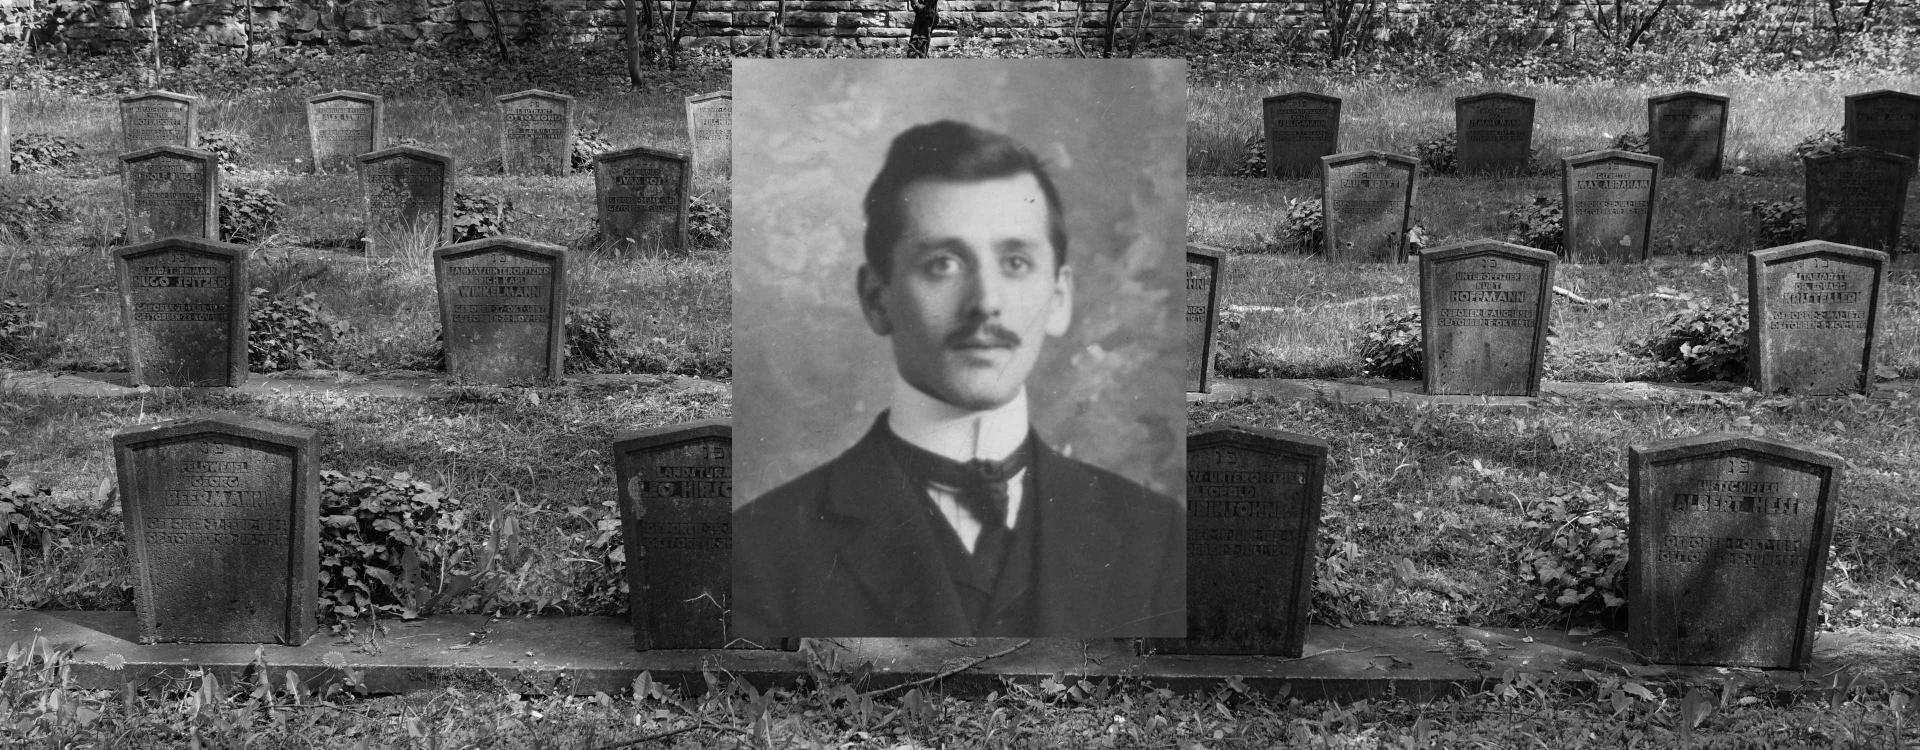 Gravestones in a cemetery, above them the portrait of a man.